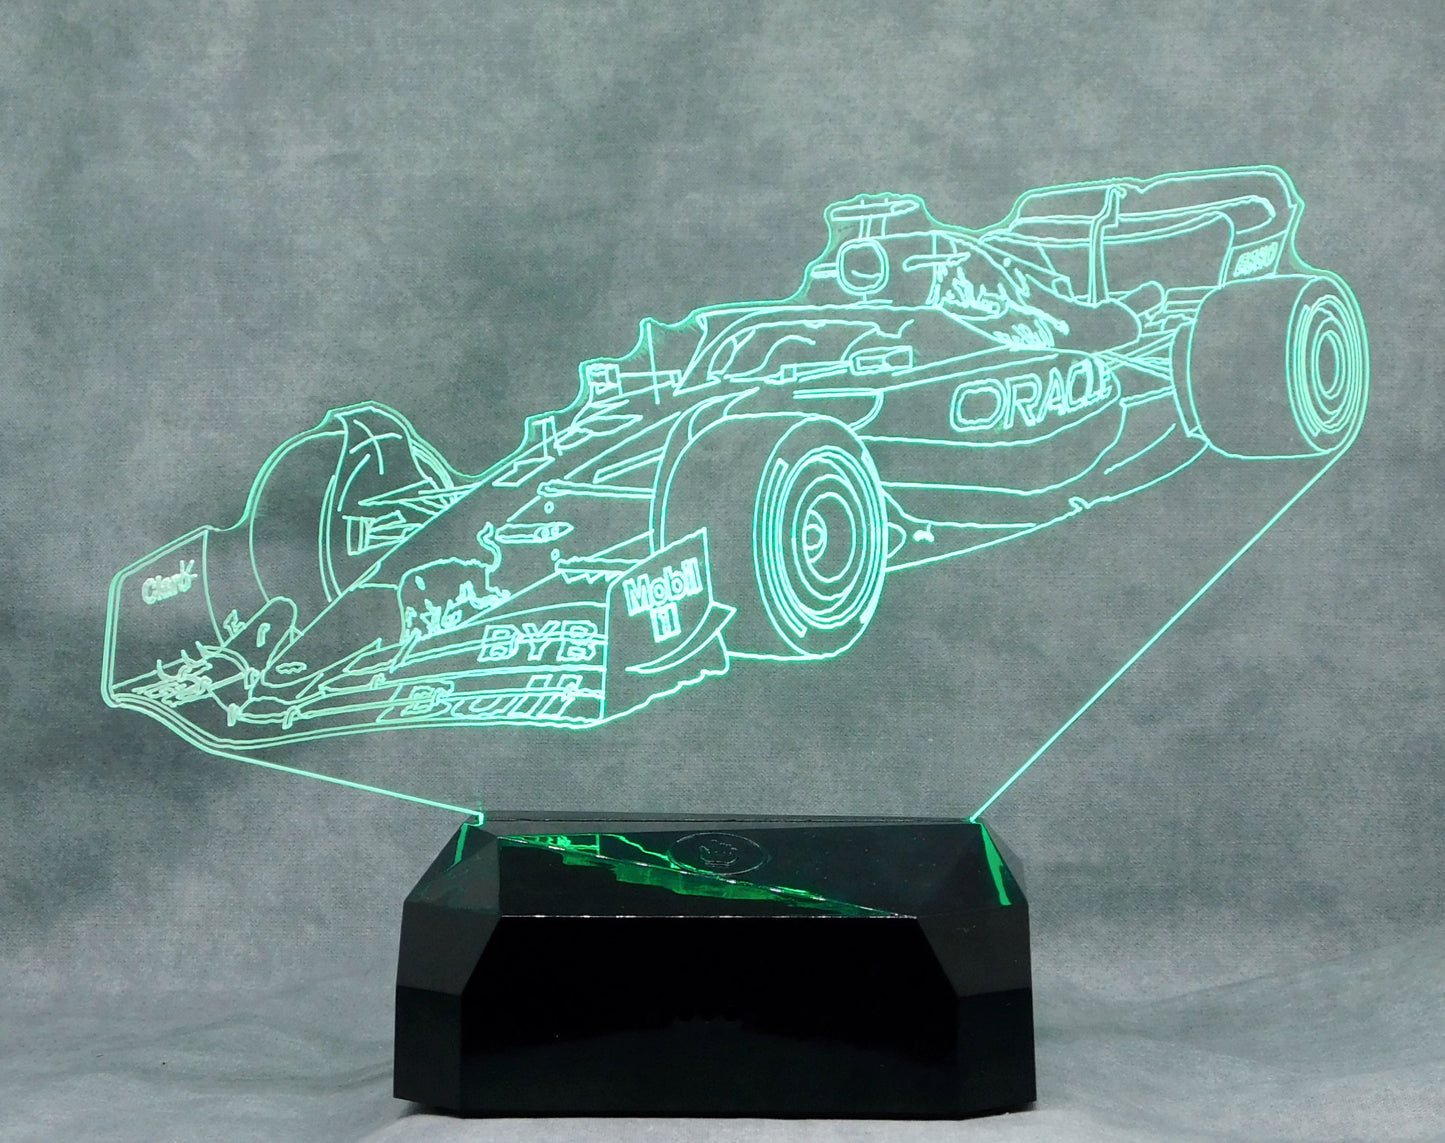 Oracle Red Bull F-1 Race Car 3-D Optical Illusion Multicolored Light